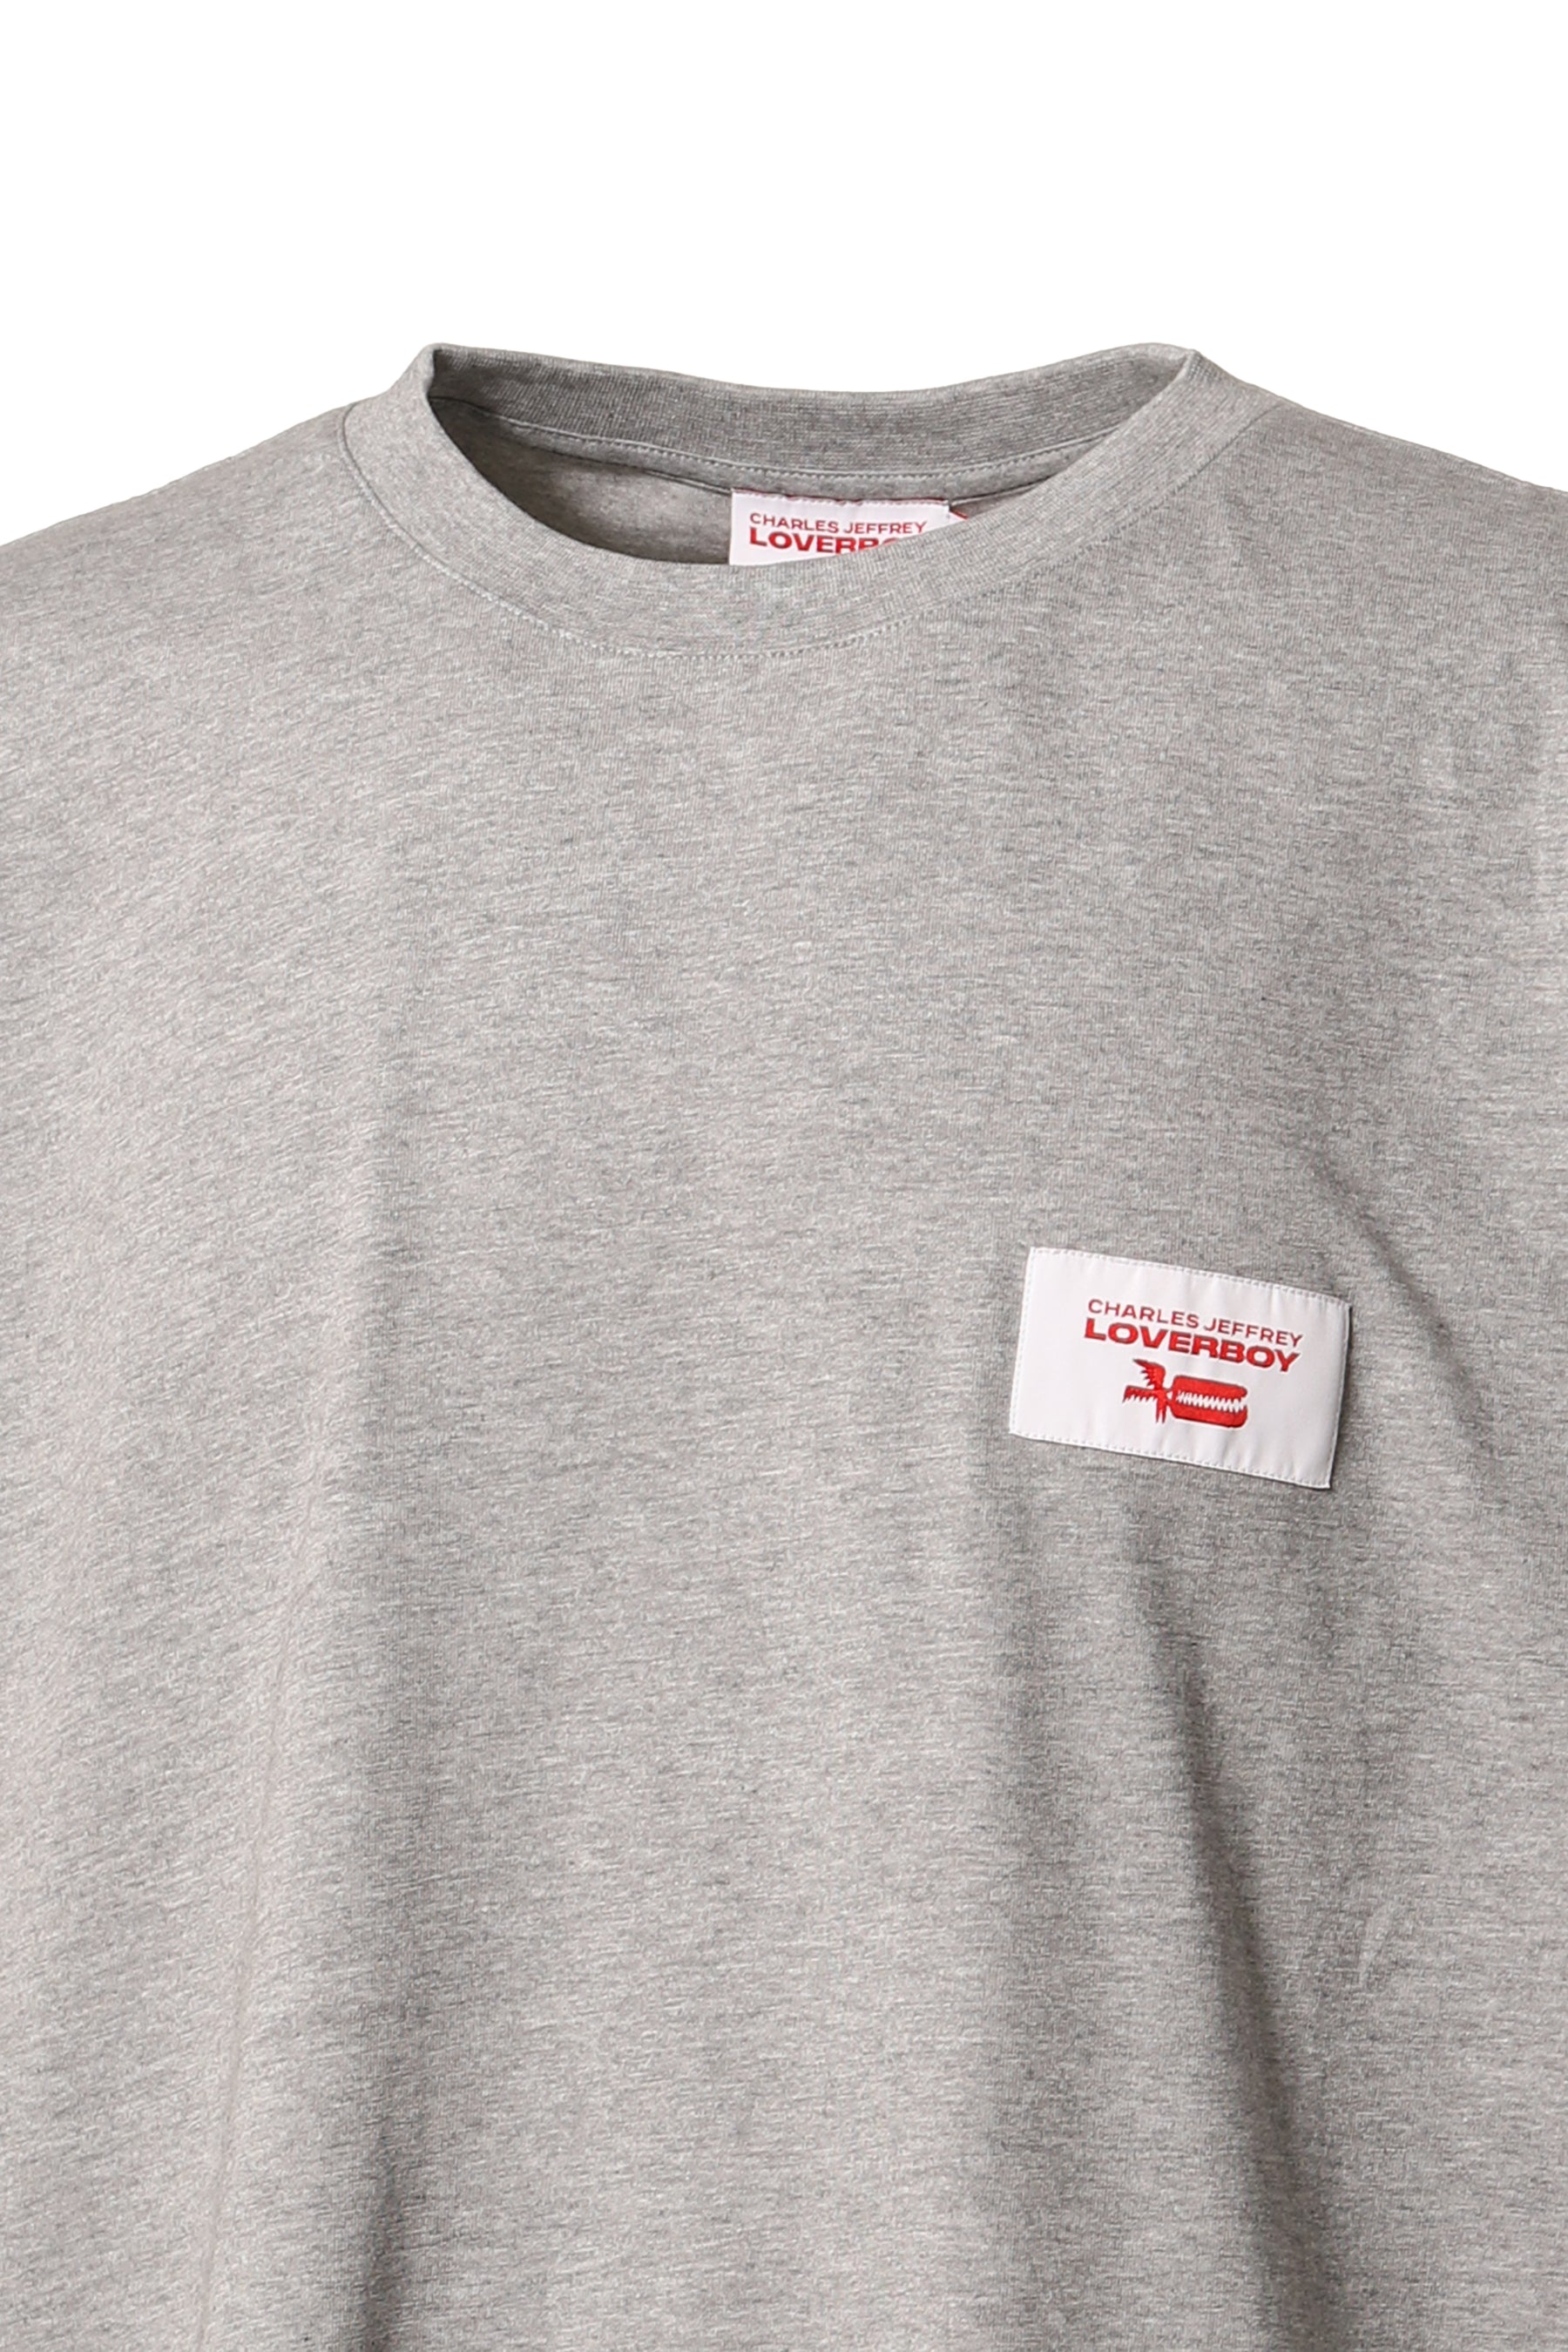 LABEL TEE / GRY